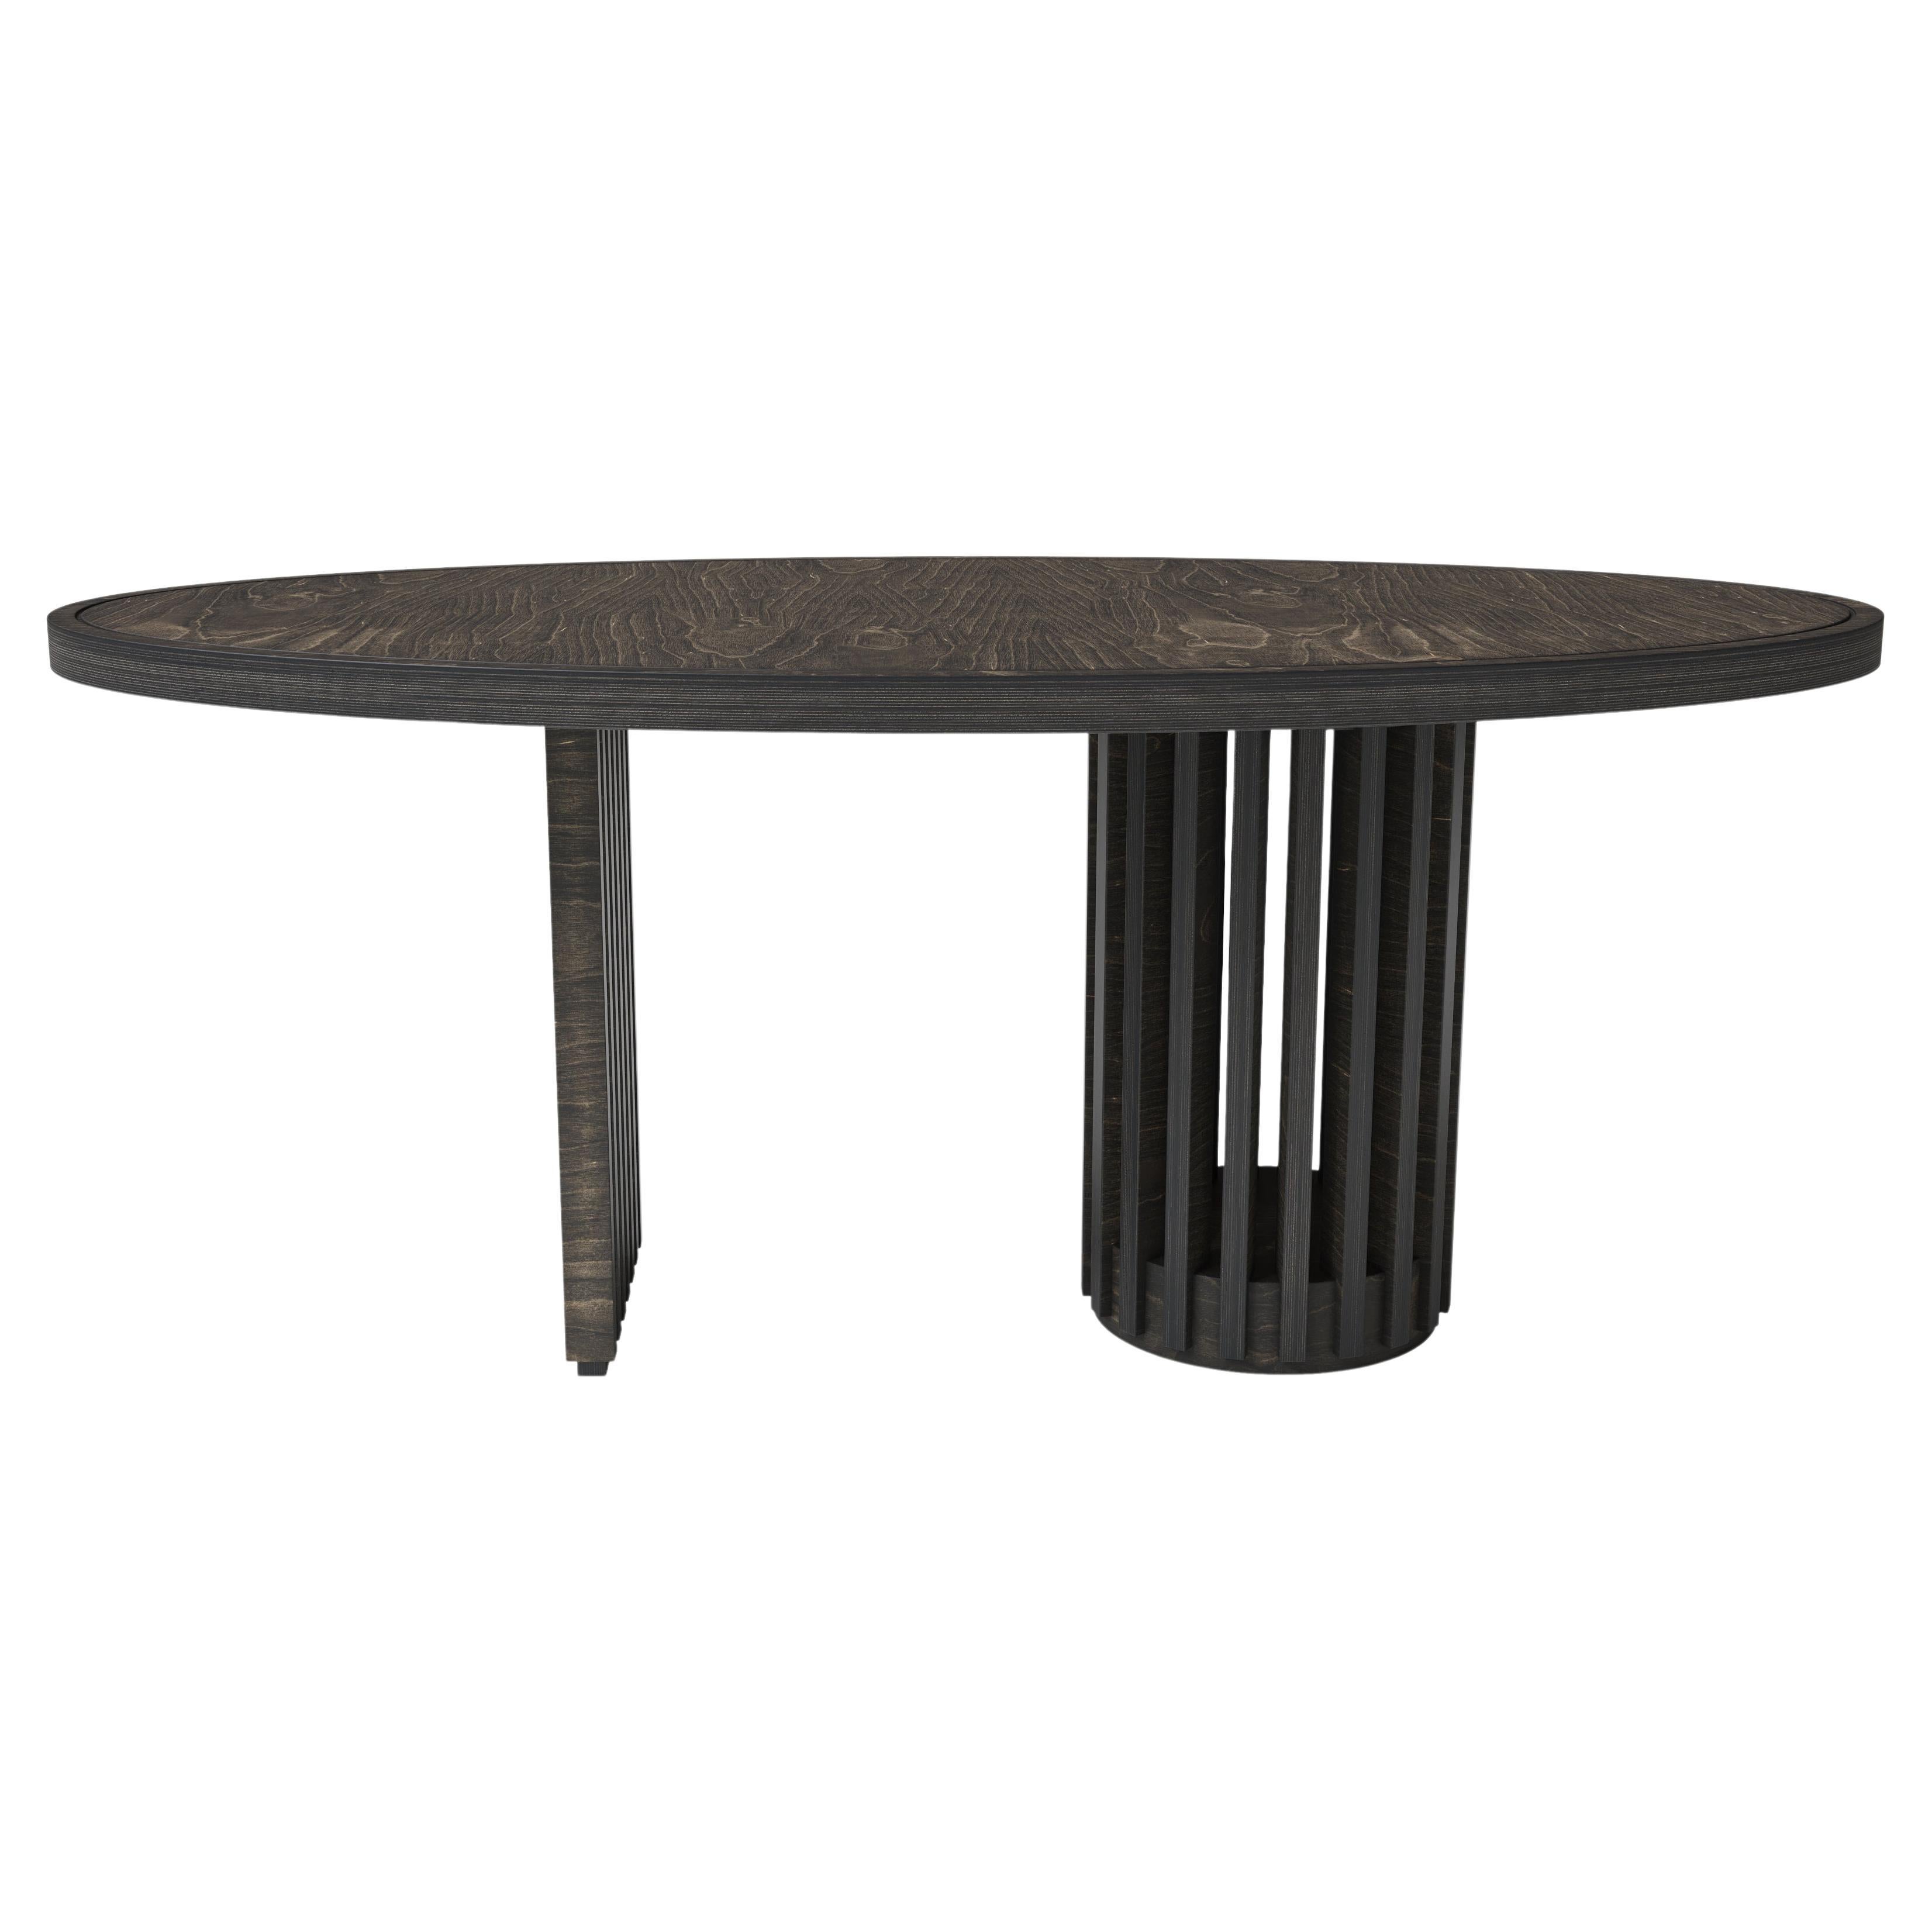 This dining table combines the smooth top oval shape with wooden slats on the asymmetrical feet. It’s minimalistic elegance contrasts with the robust materials inspired in the Nordic design.
A functional and iconic table that makes a great addition